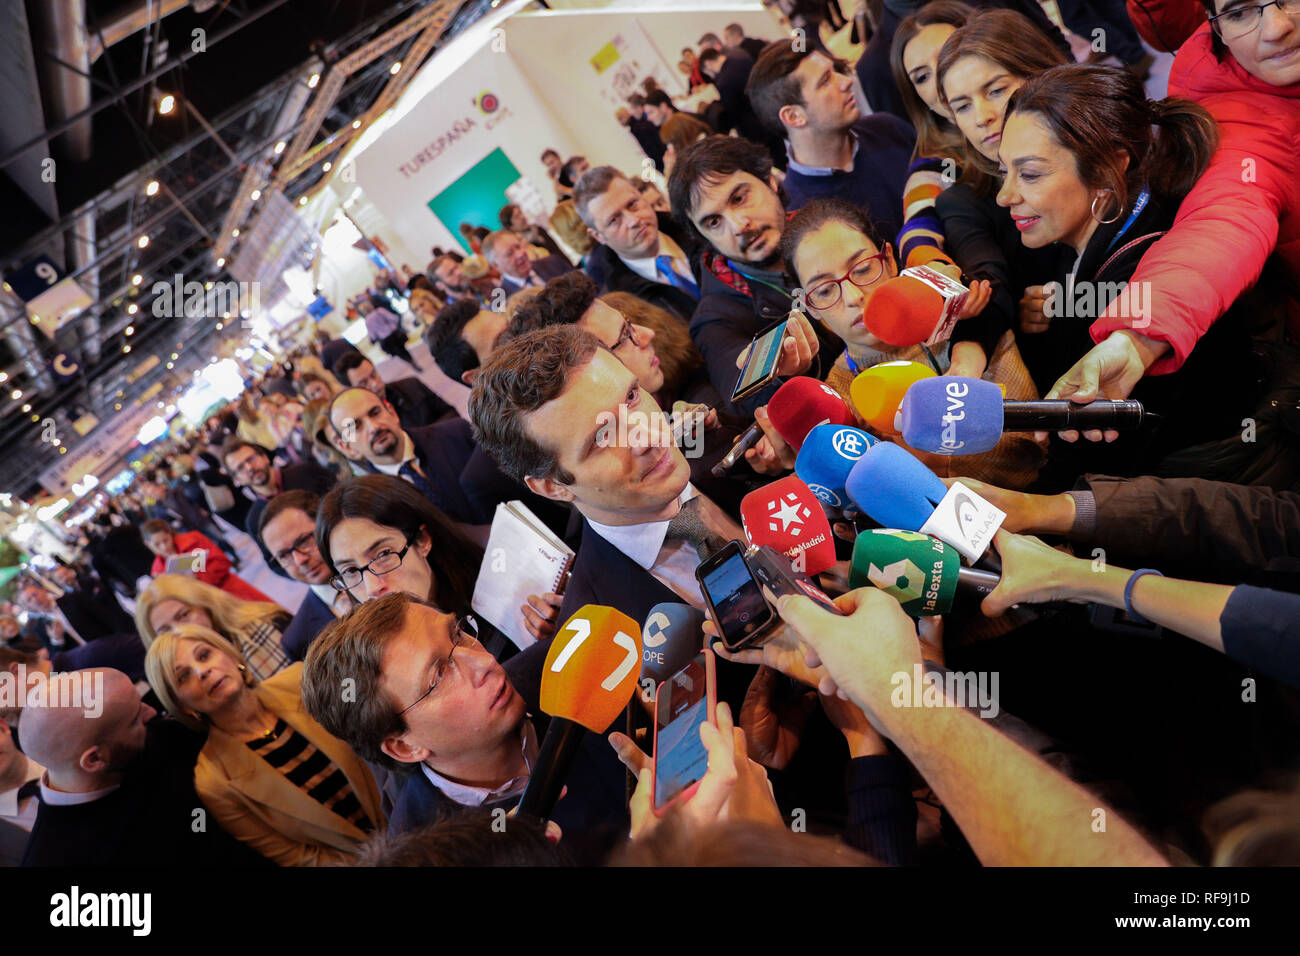 Pablo Casado seen making a statement to the media during the event.  The leader of the Popular Party, PP, Pablo Casado has visited the fair of FITUR accompanied by leaders of the Popular Party. Stock Photo